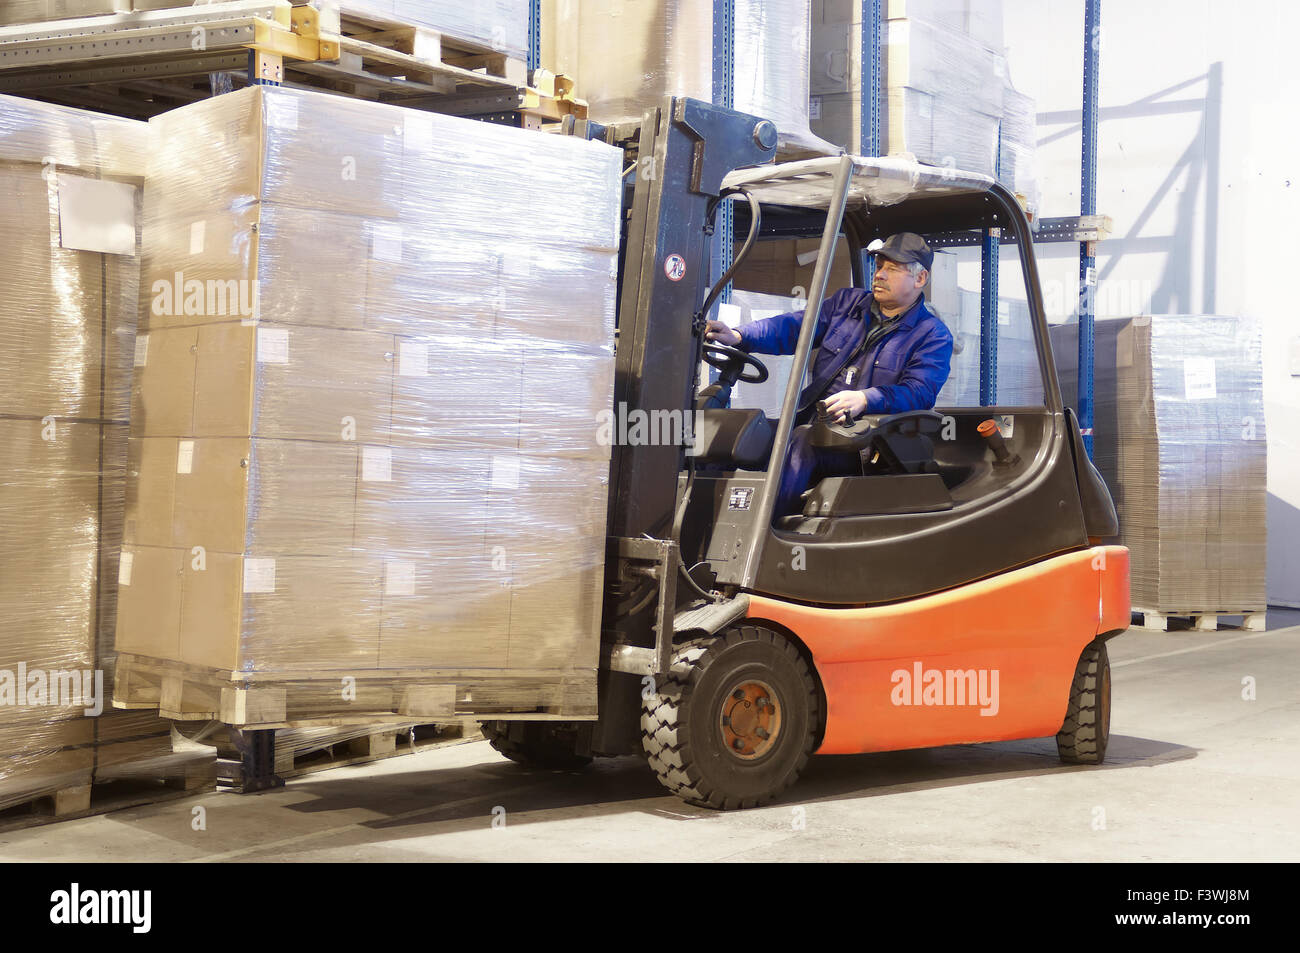 forklift at work with driver Stock Photo